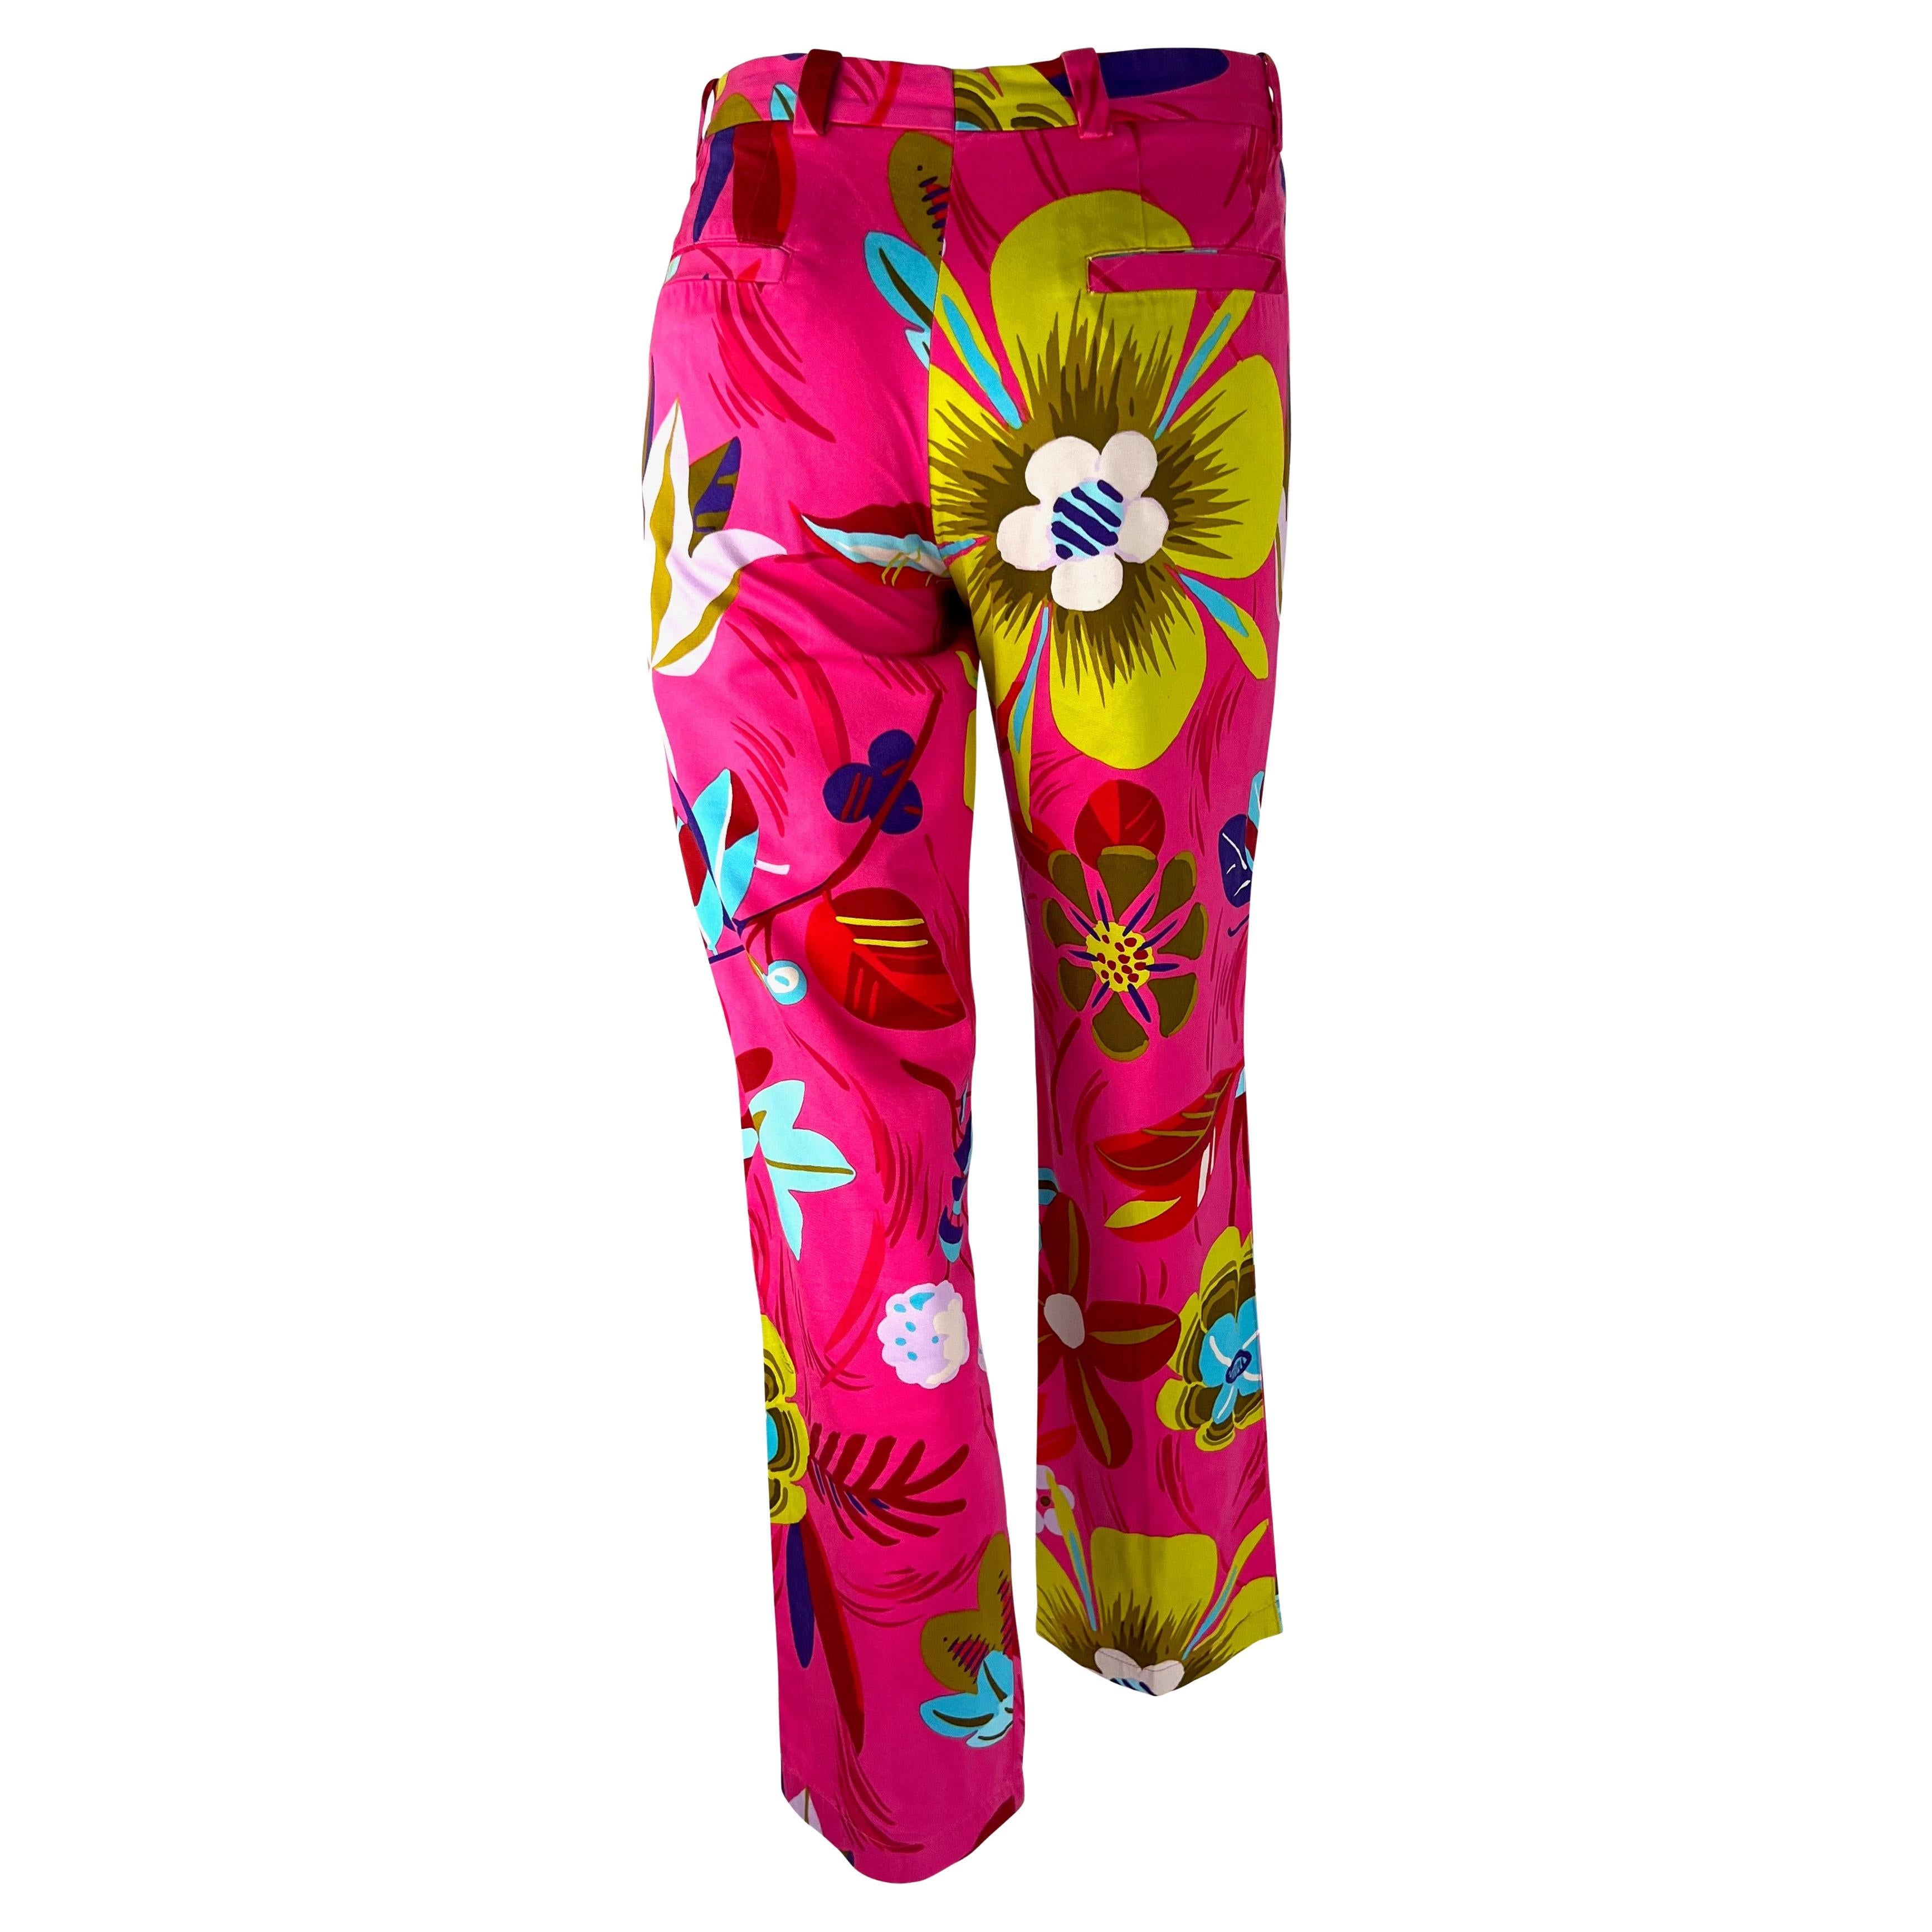 S/S 1999 Gucci by Tom Ford Runway Acid Flower Hot Pink Print Cotton Pants In Excellent Condition For Sale In West Hollywood, CA